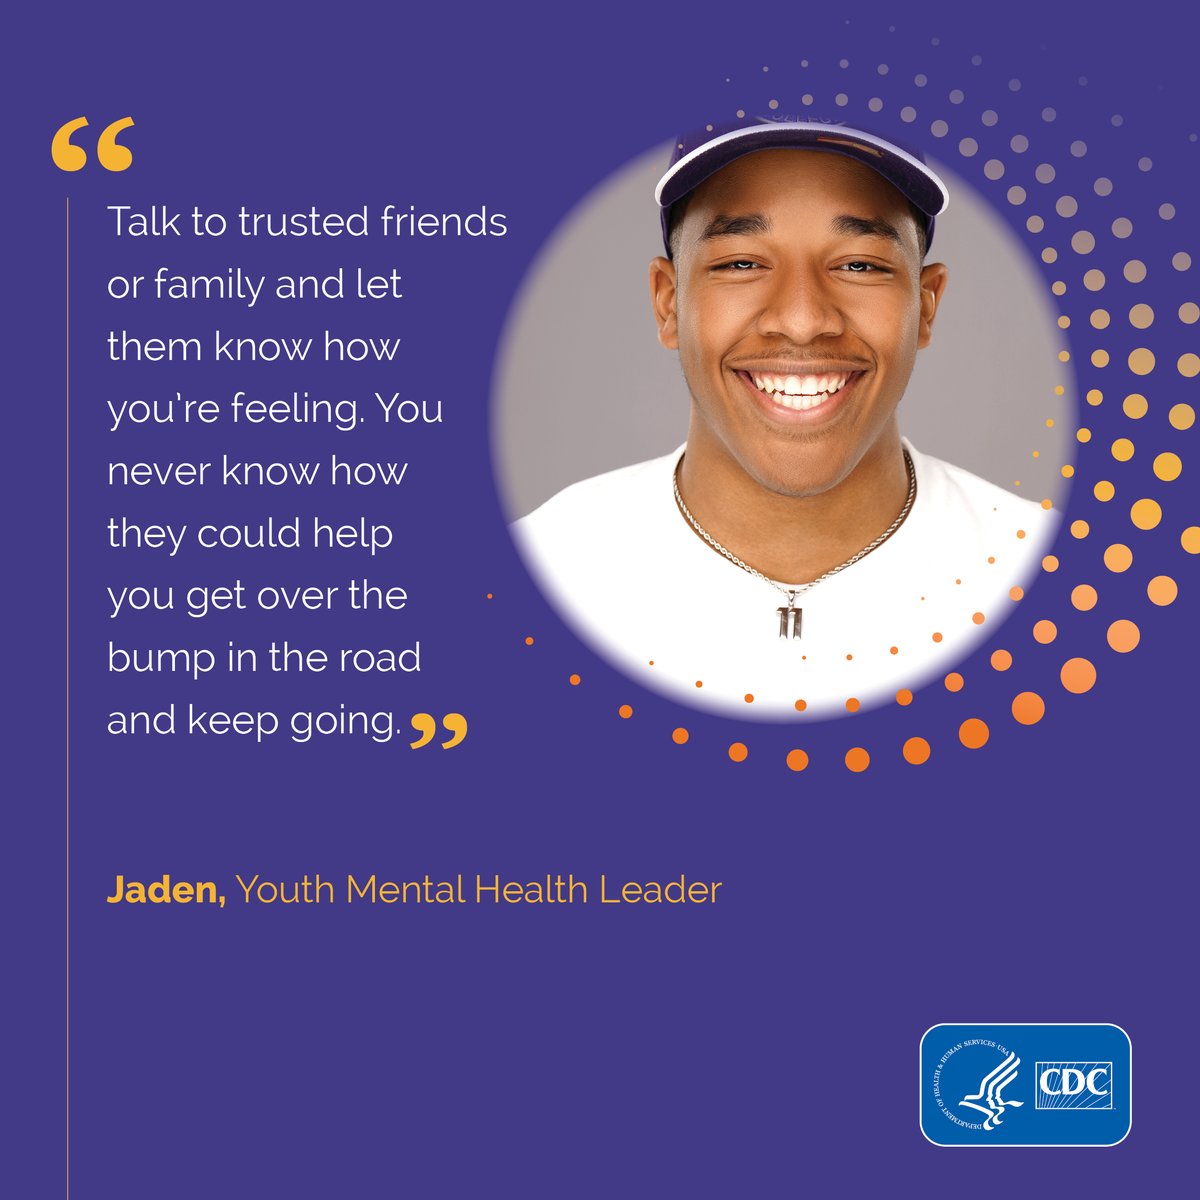 Feeling connected to caring adults is critical to a young person’s health. Make sure the teens in your life know you’re there for them and willing to listen. #MentalHealthAwarenessMonth #YouthVoices